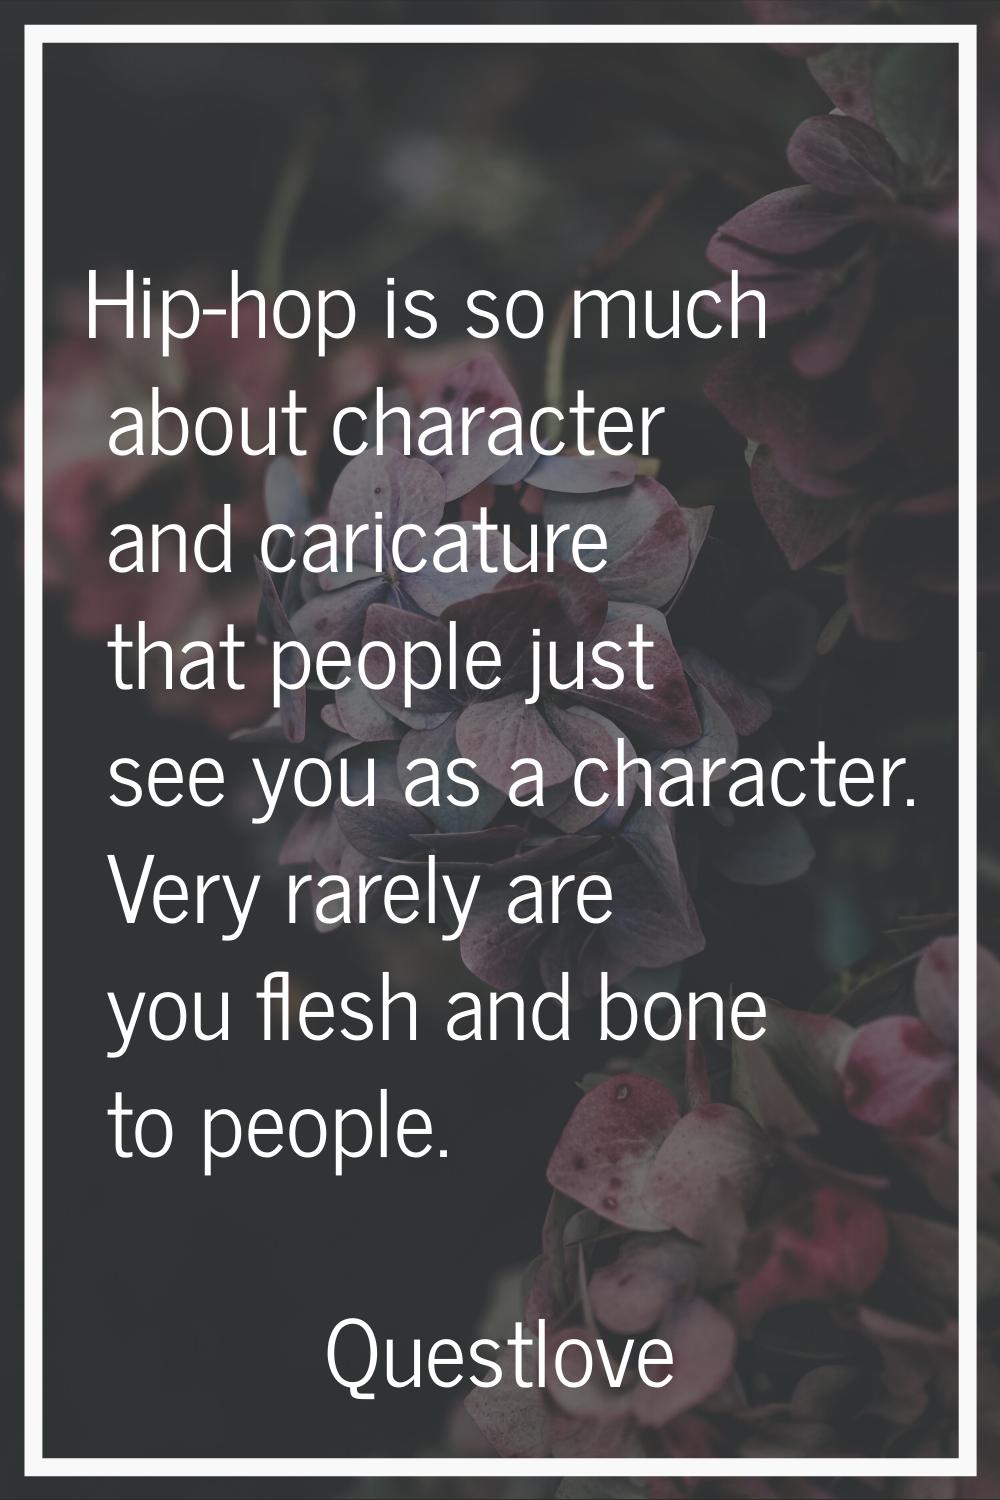 Hip-hop is so much about character and caricature that people just see you as a character. Very rar